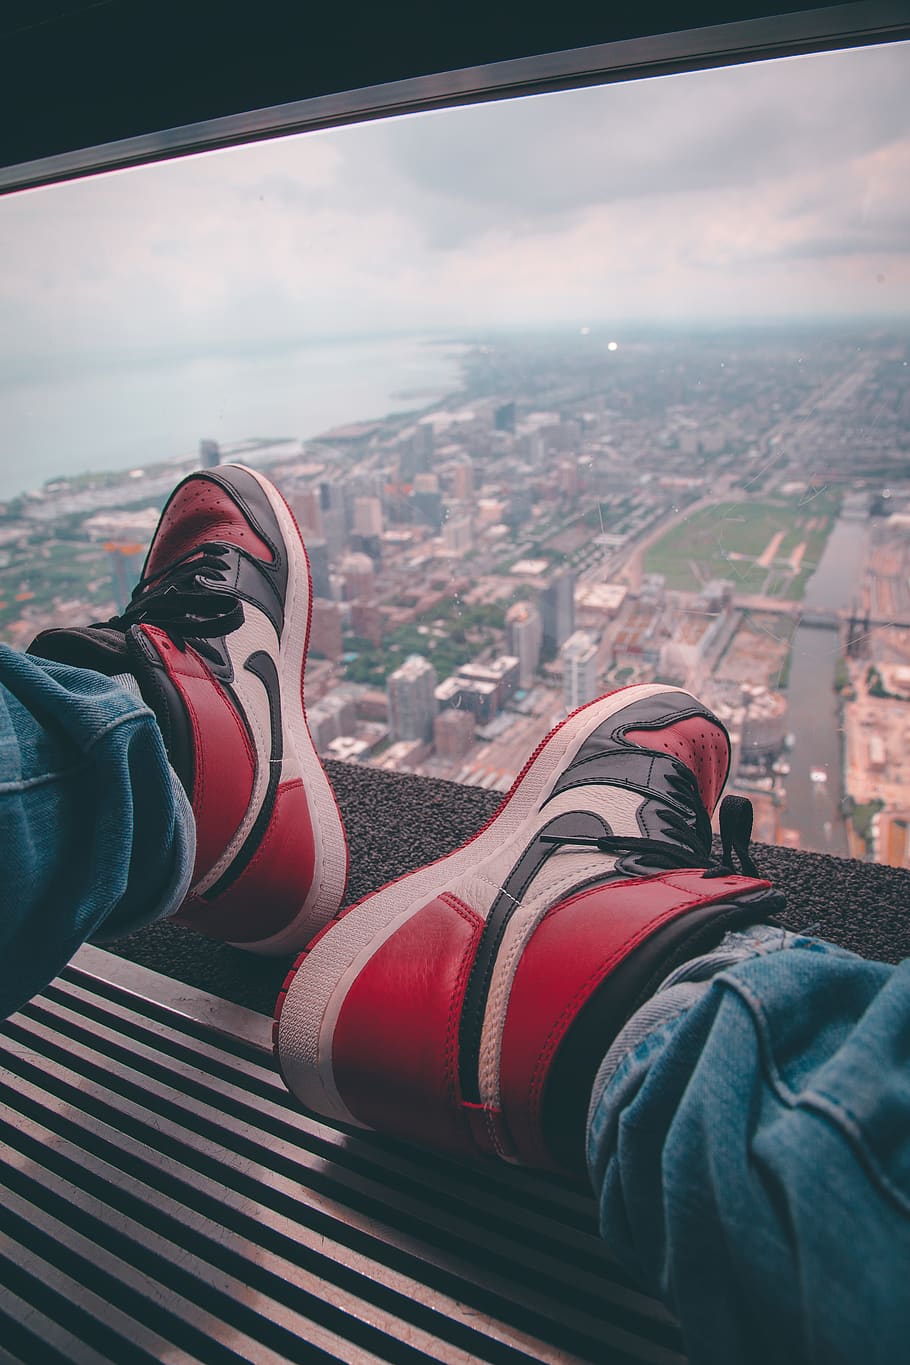 Red-and-black Air Jordan 1's, architecture, buildings, city, close-up